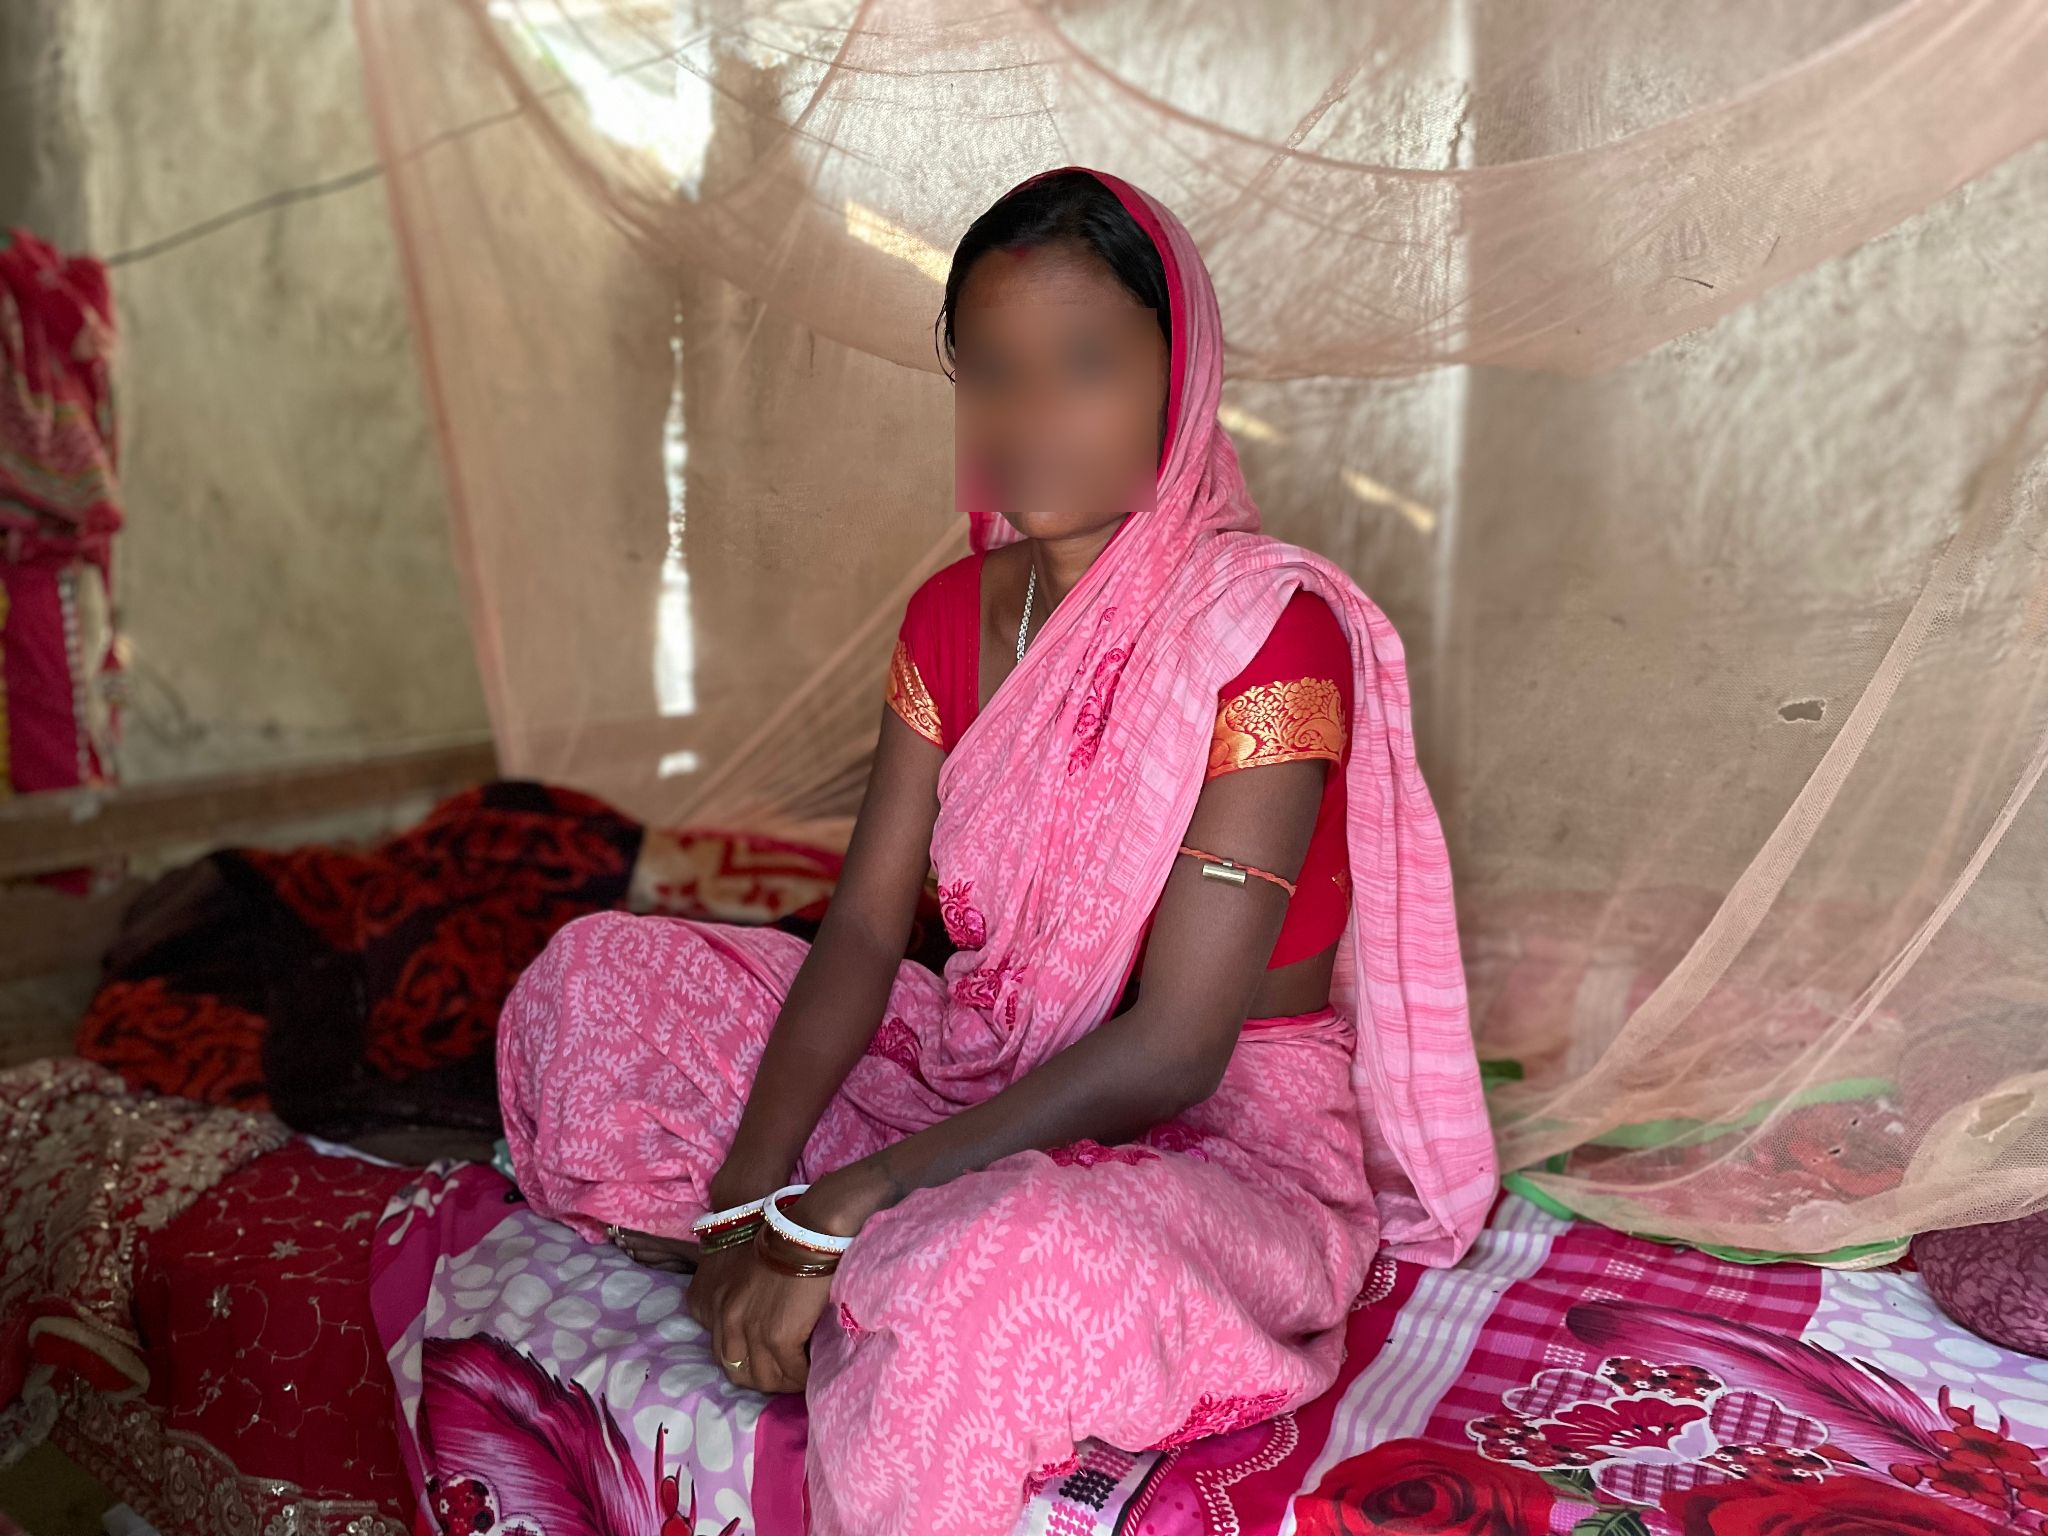 Woman in sari with face blurred to protect identity